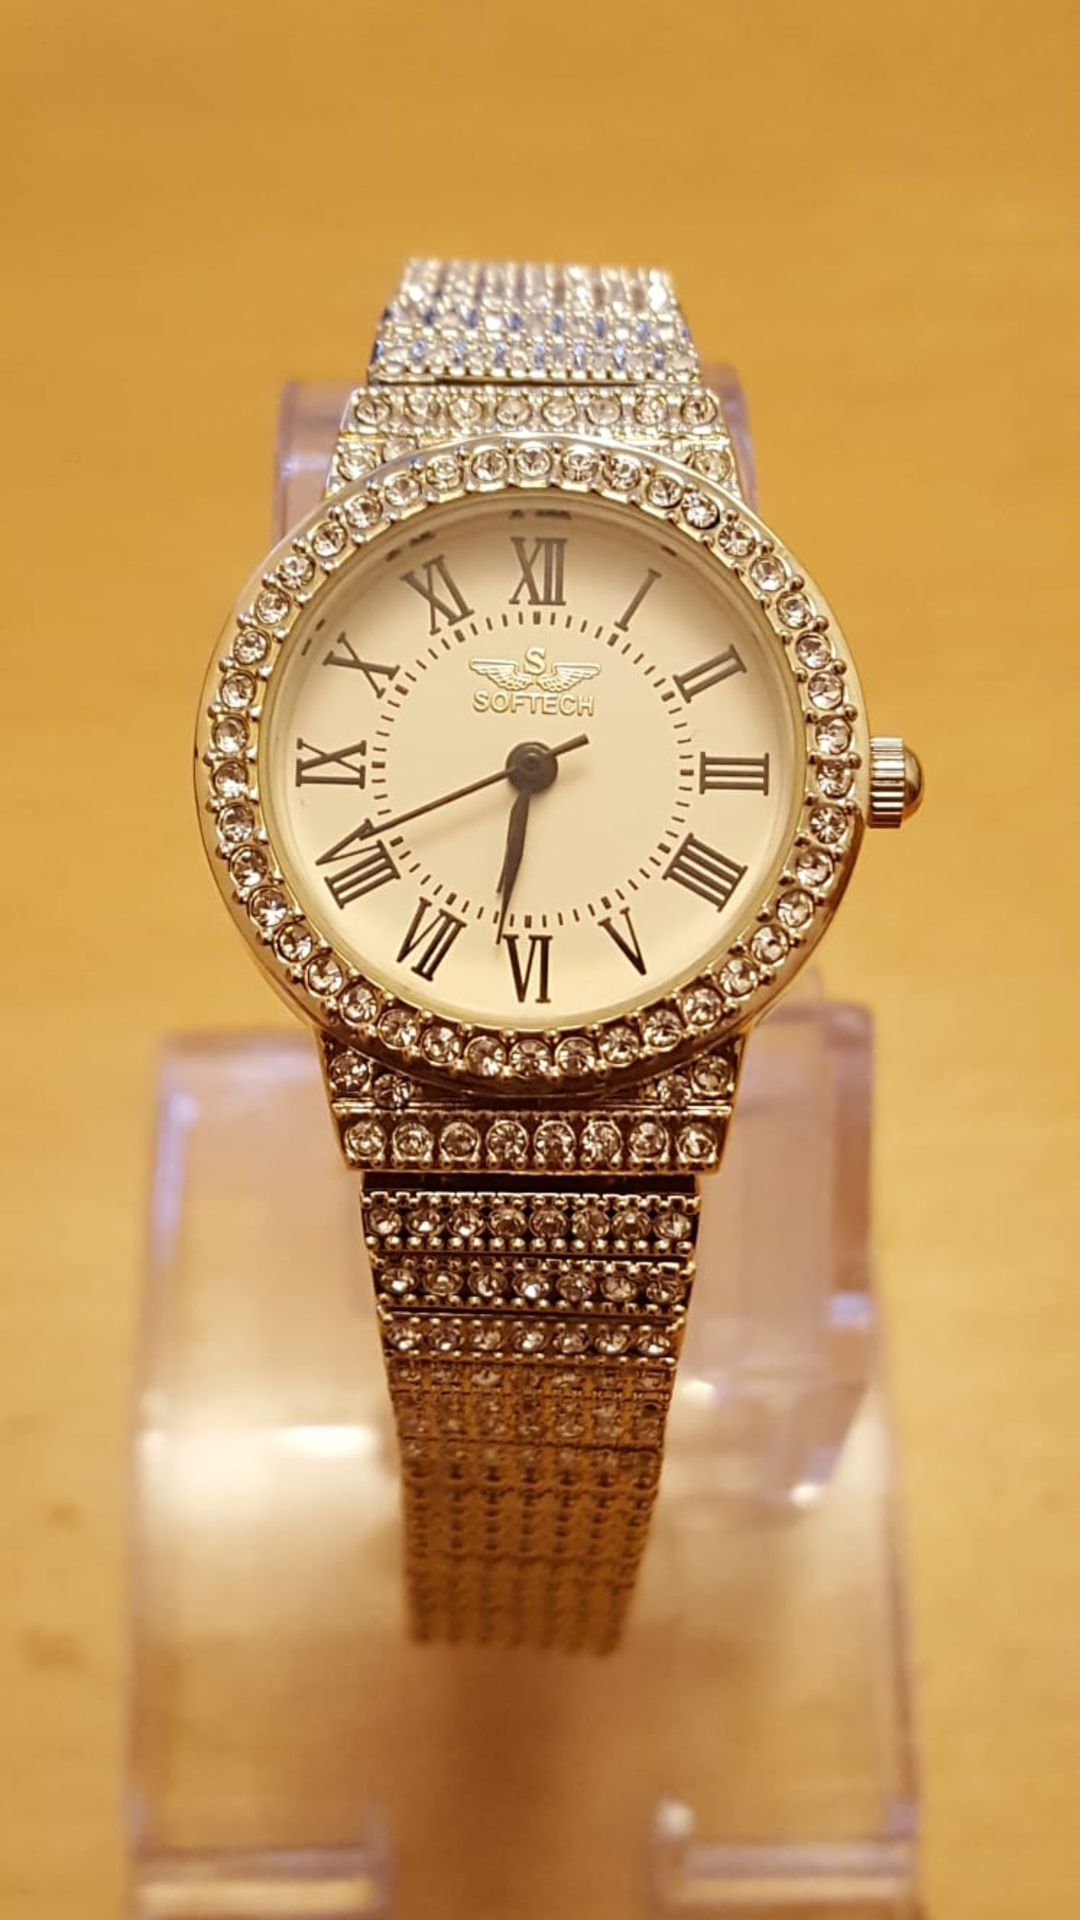 Brand New Ladies Softech Fashion Dress Watch, 657, Complete With Gift Pouch